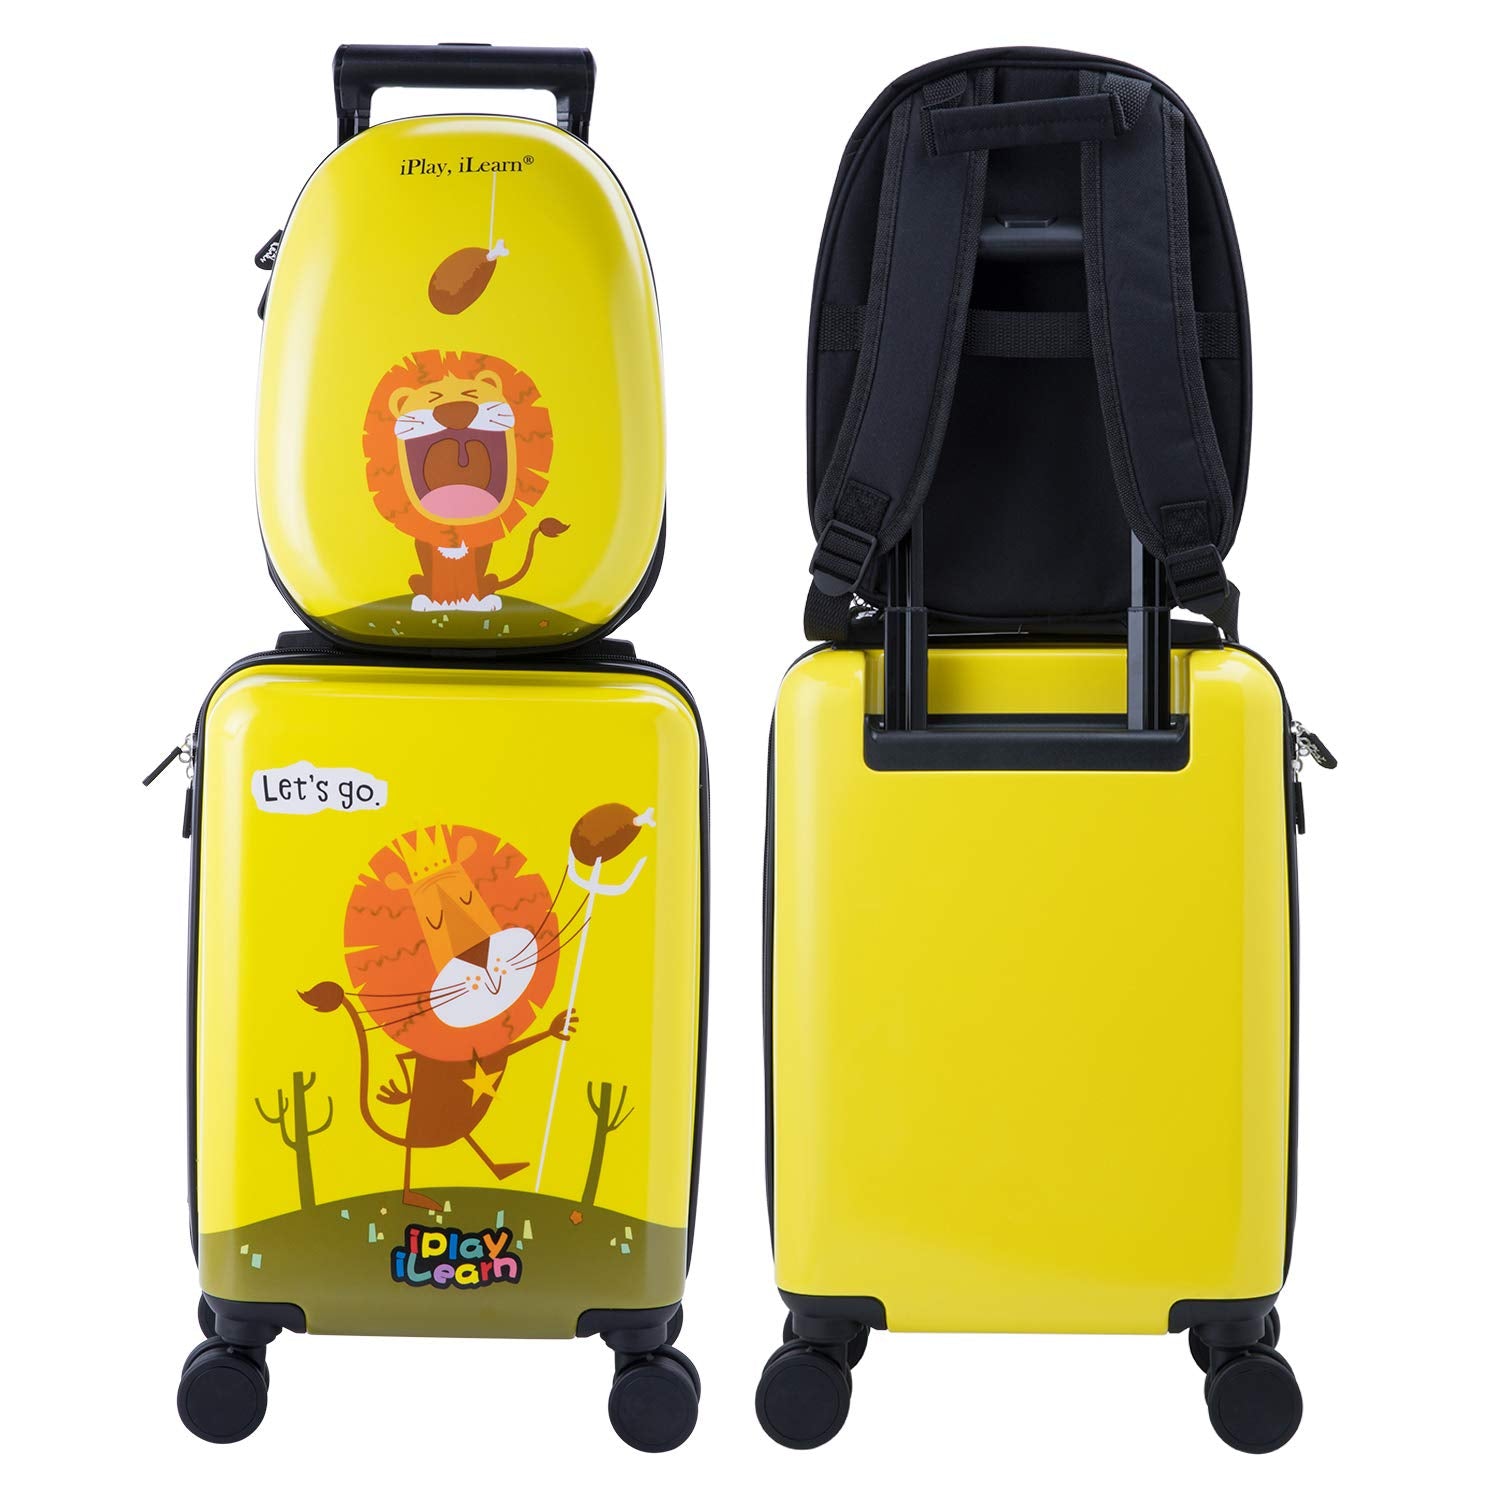 iPlay, iLearn Kids Lion Luggage Set Carry on Suitcase with Backpack – iPlay  iLearn Toys